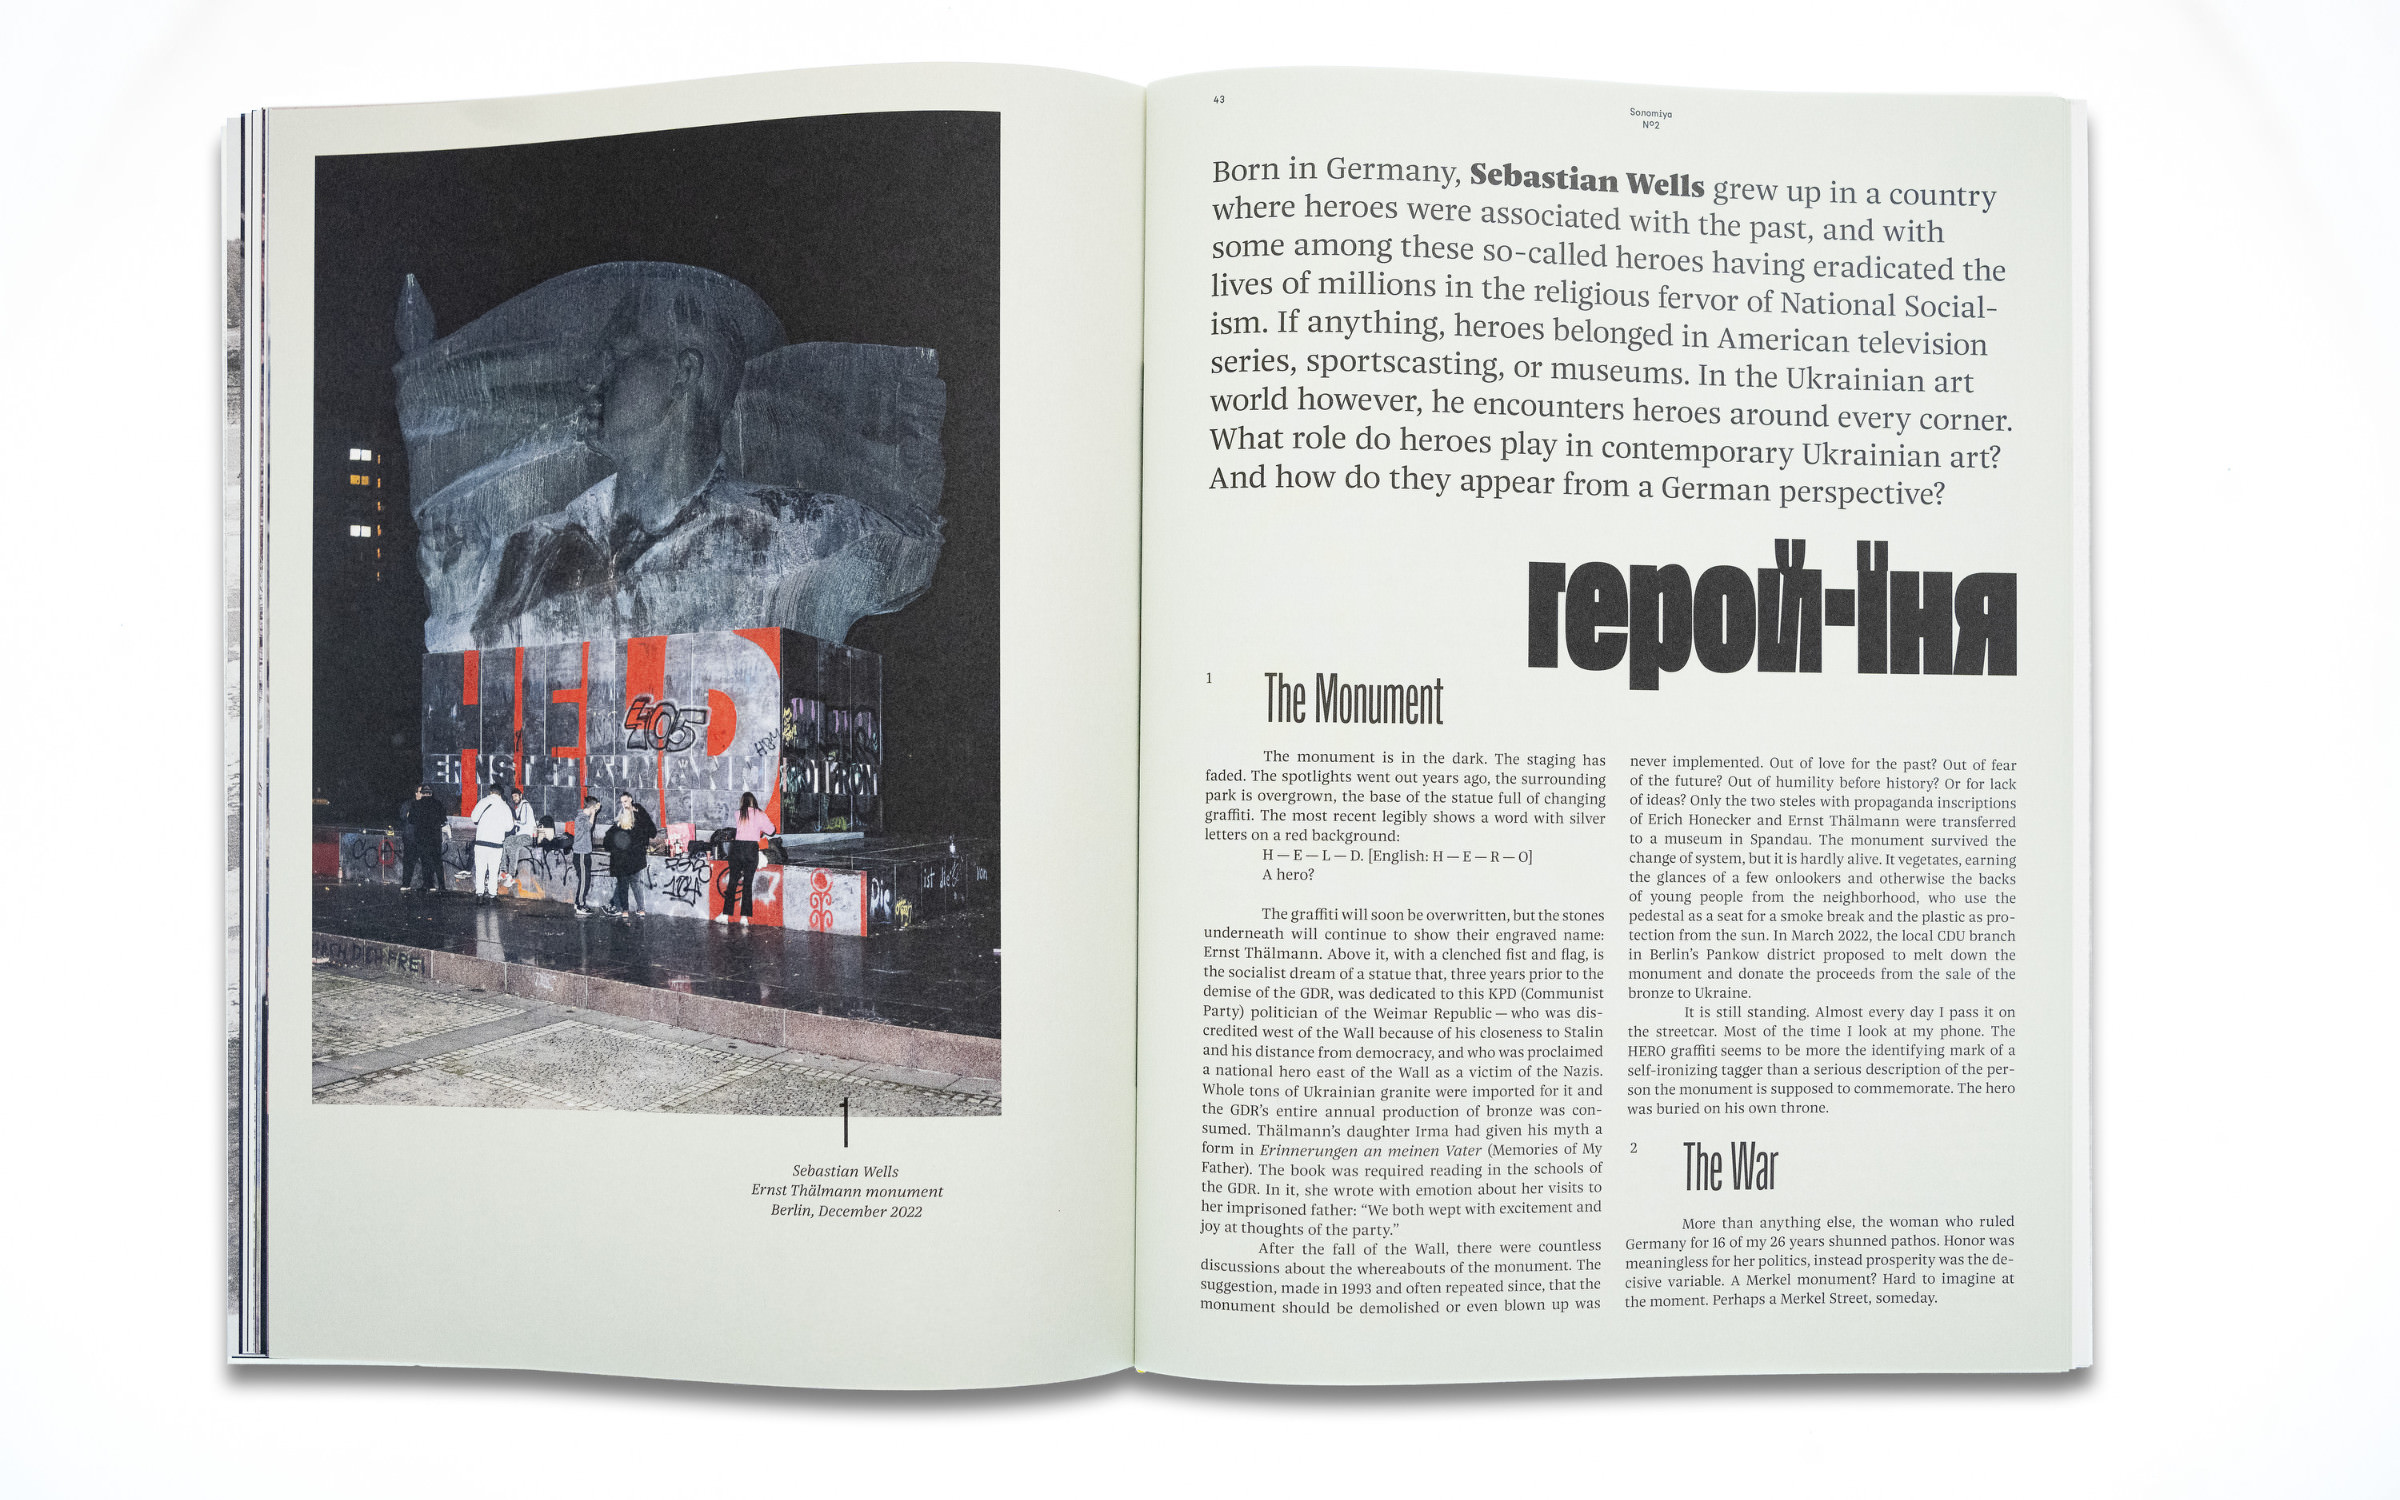 The Nice type system along with Theodor in use for the Soлomiya Art Magazine Nº 2